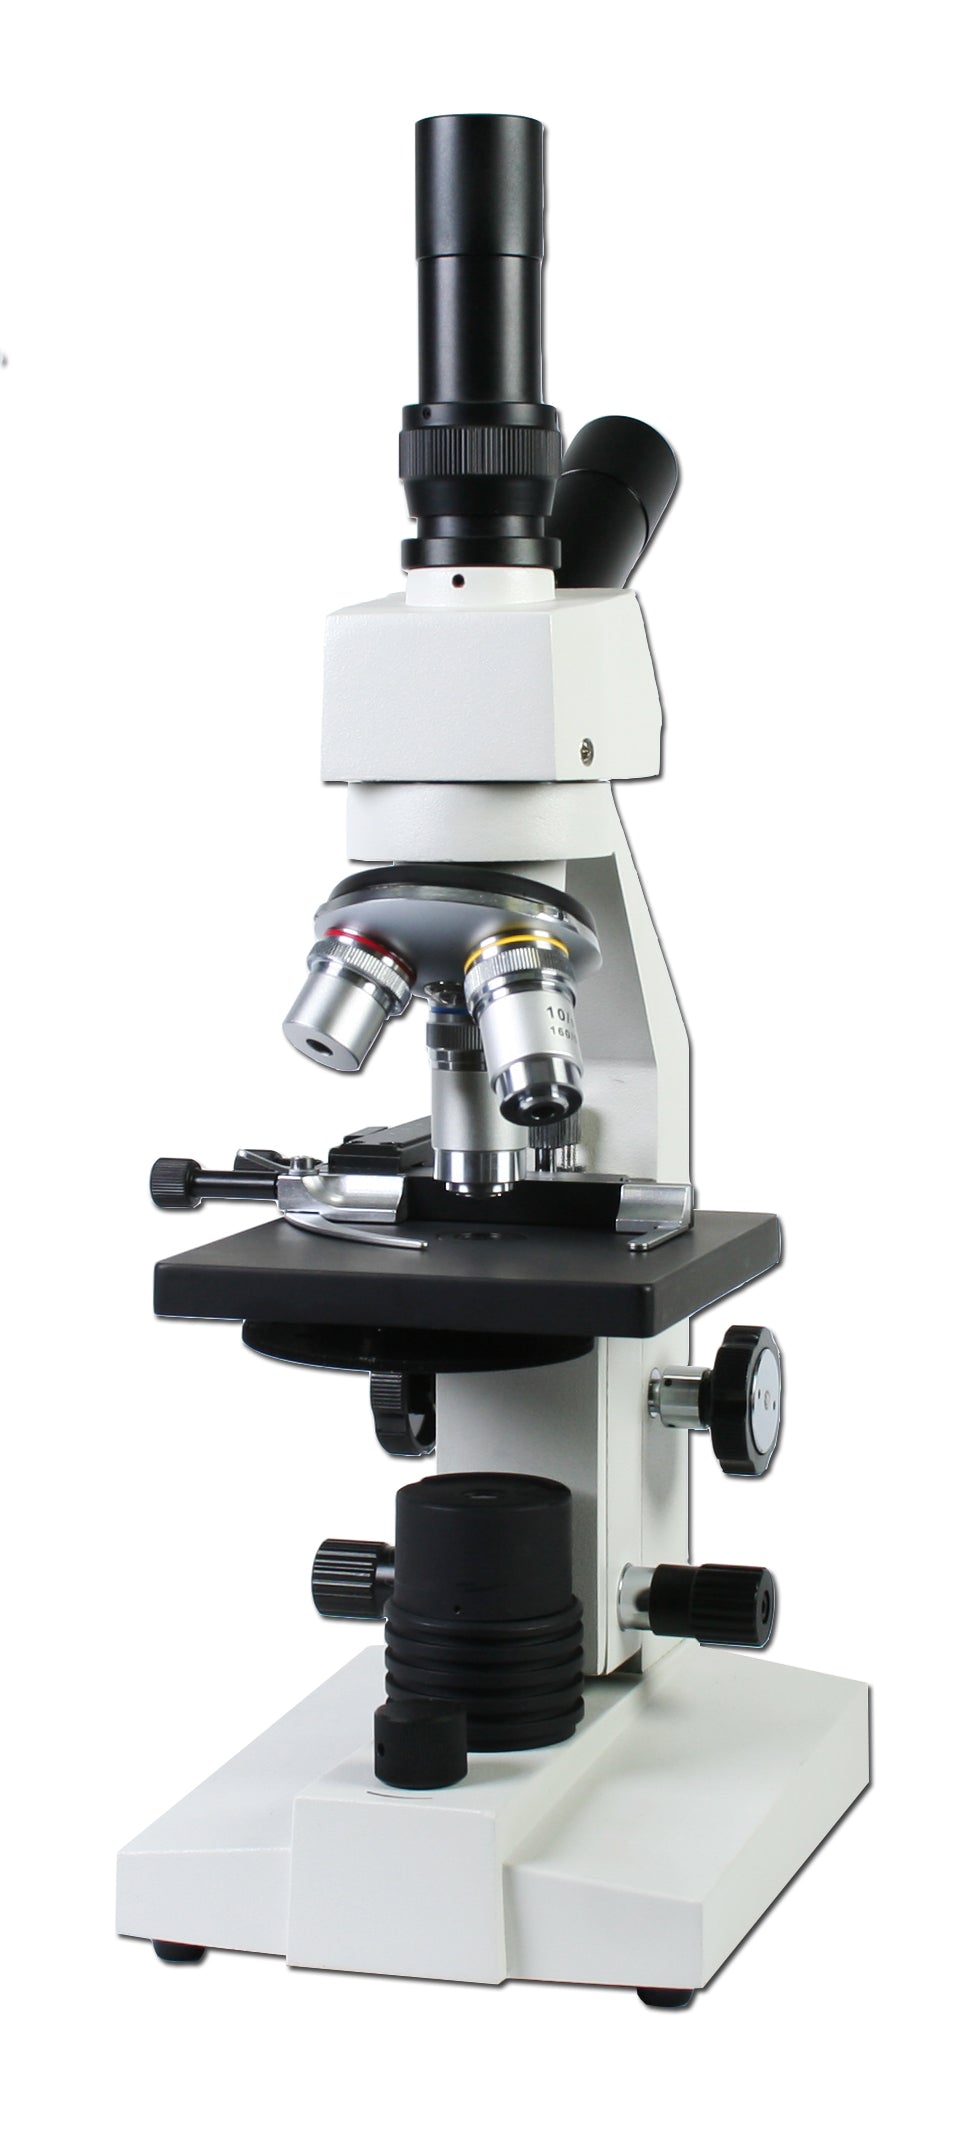 Dual View LED Microscope - 132-CLED-MS